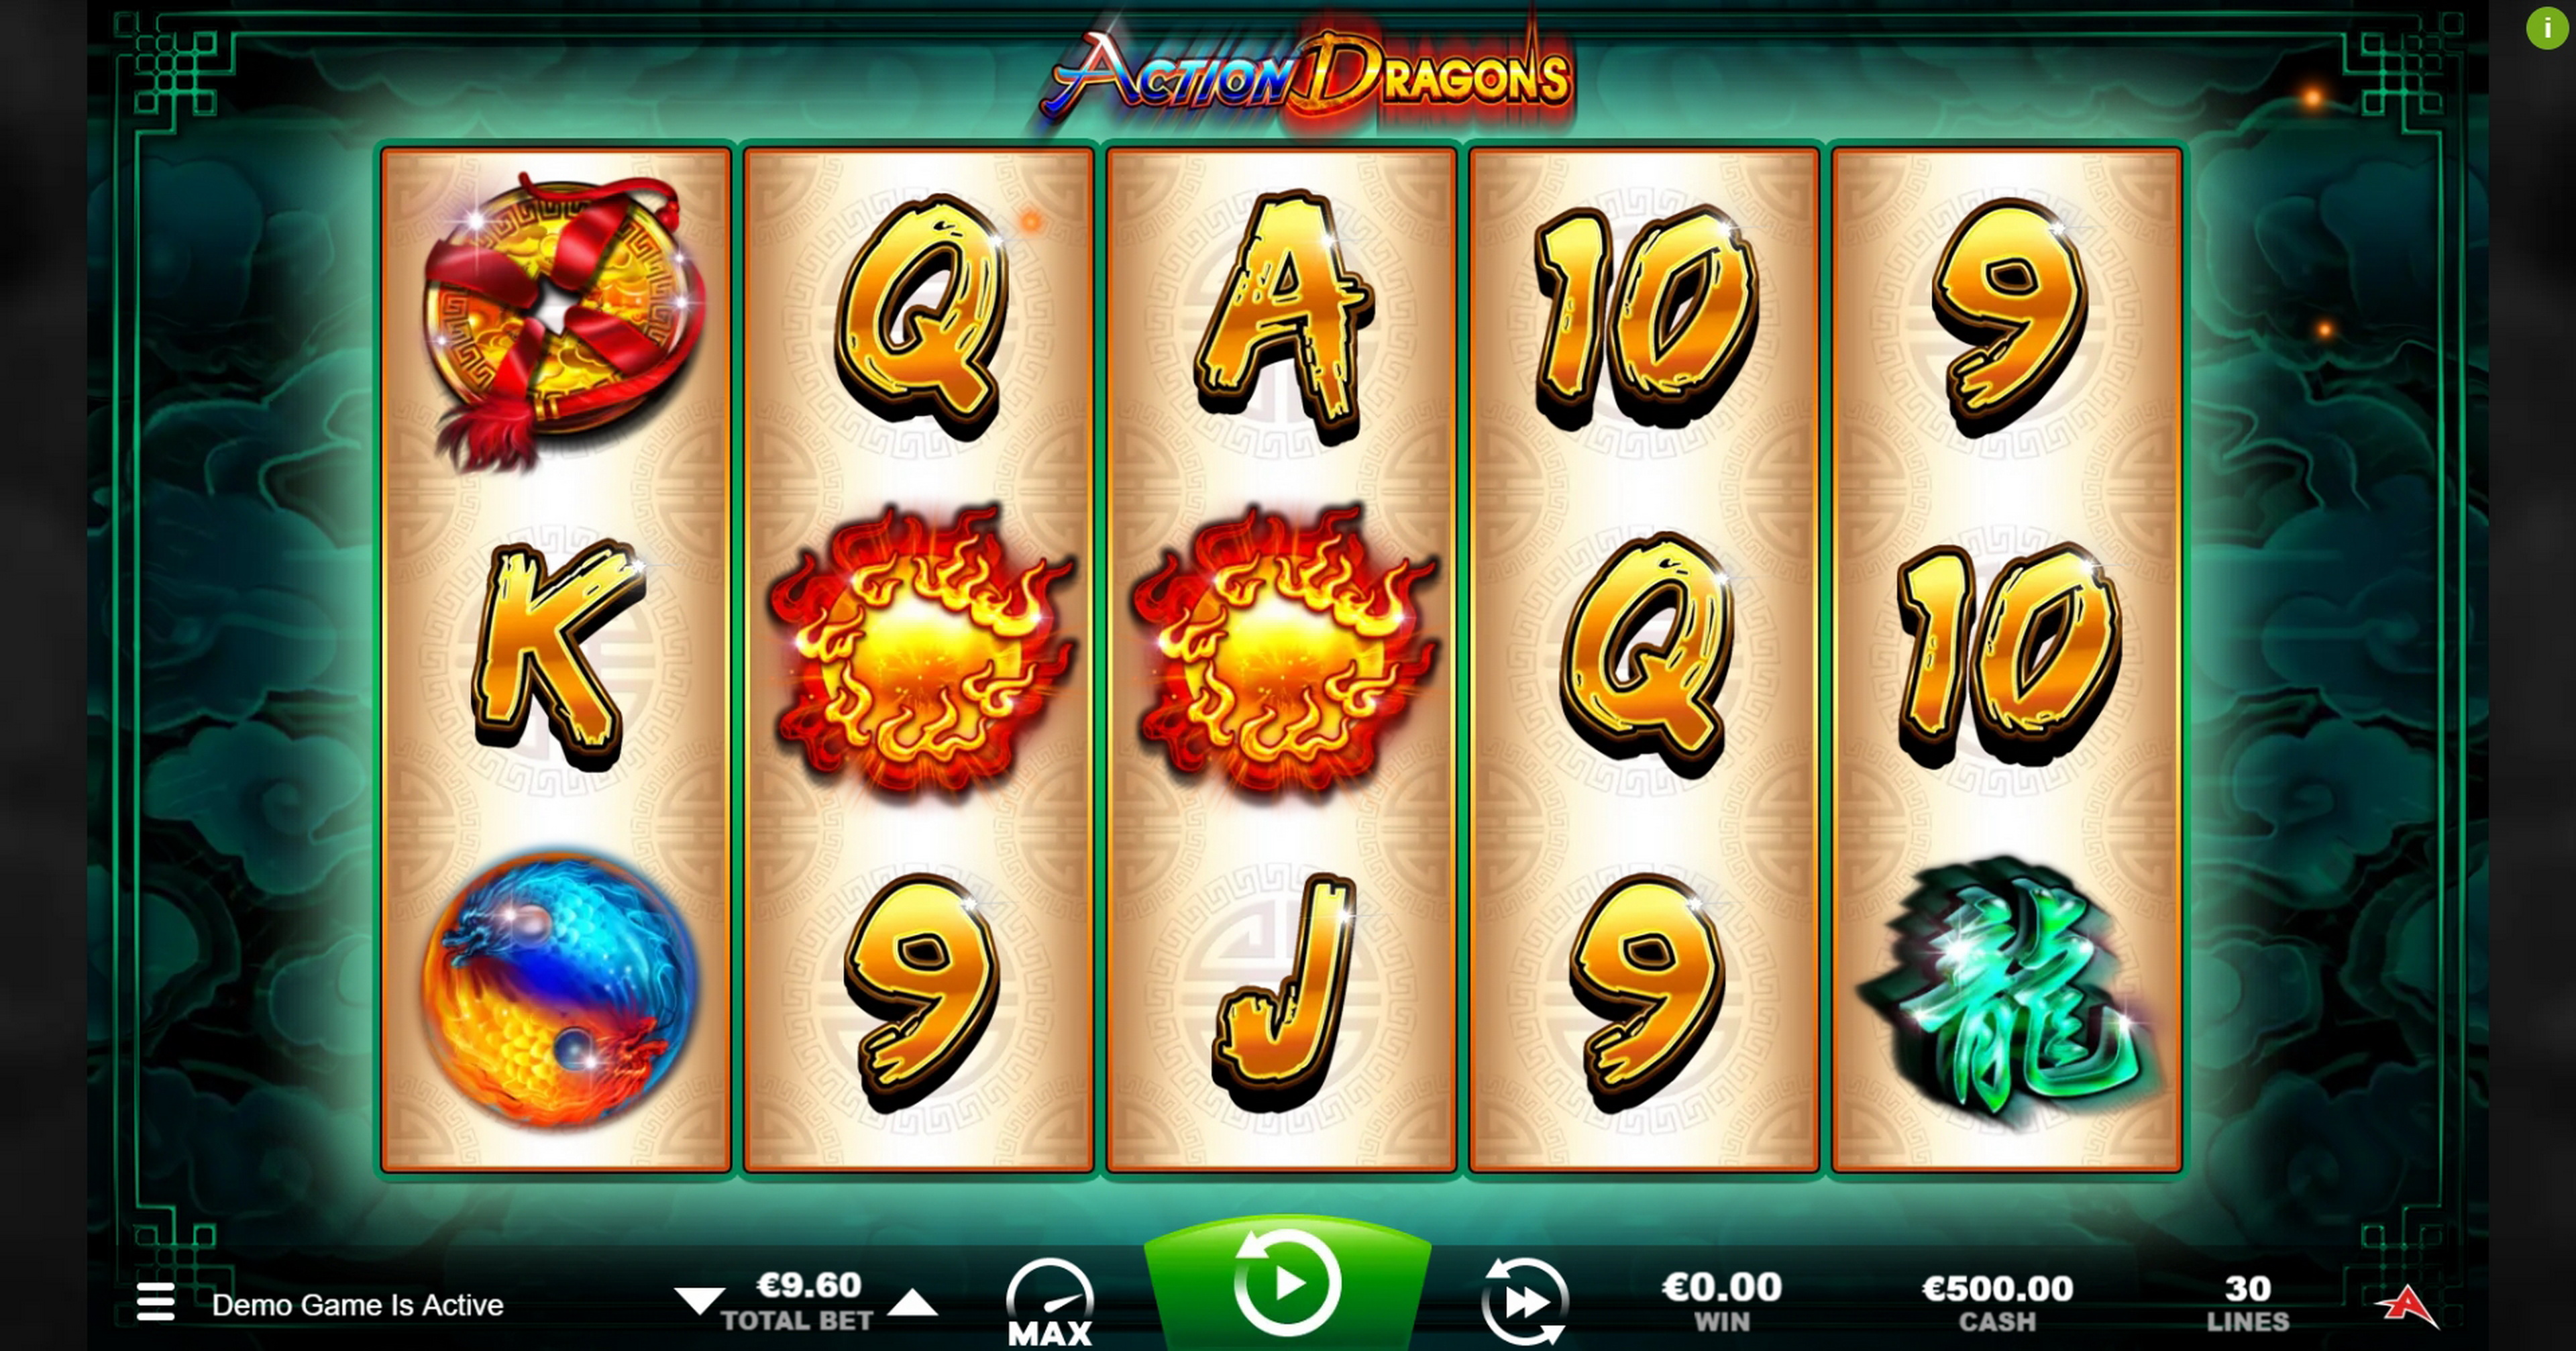 Reels in Action Dragons Slot Game by Ainsworth Gaming Technology